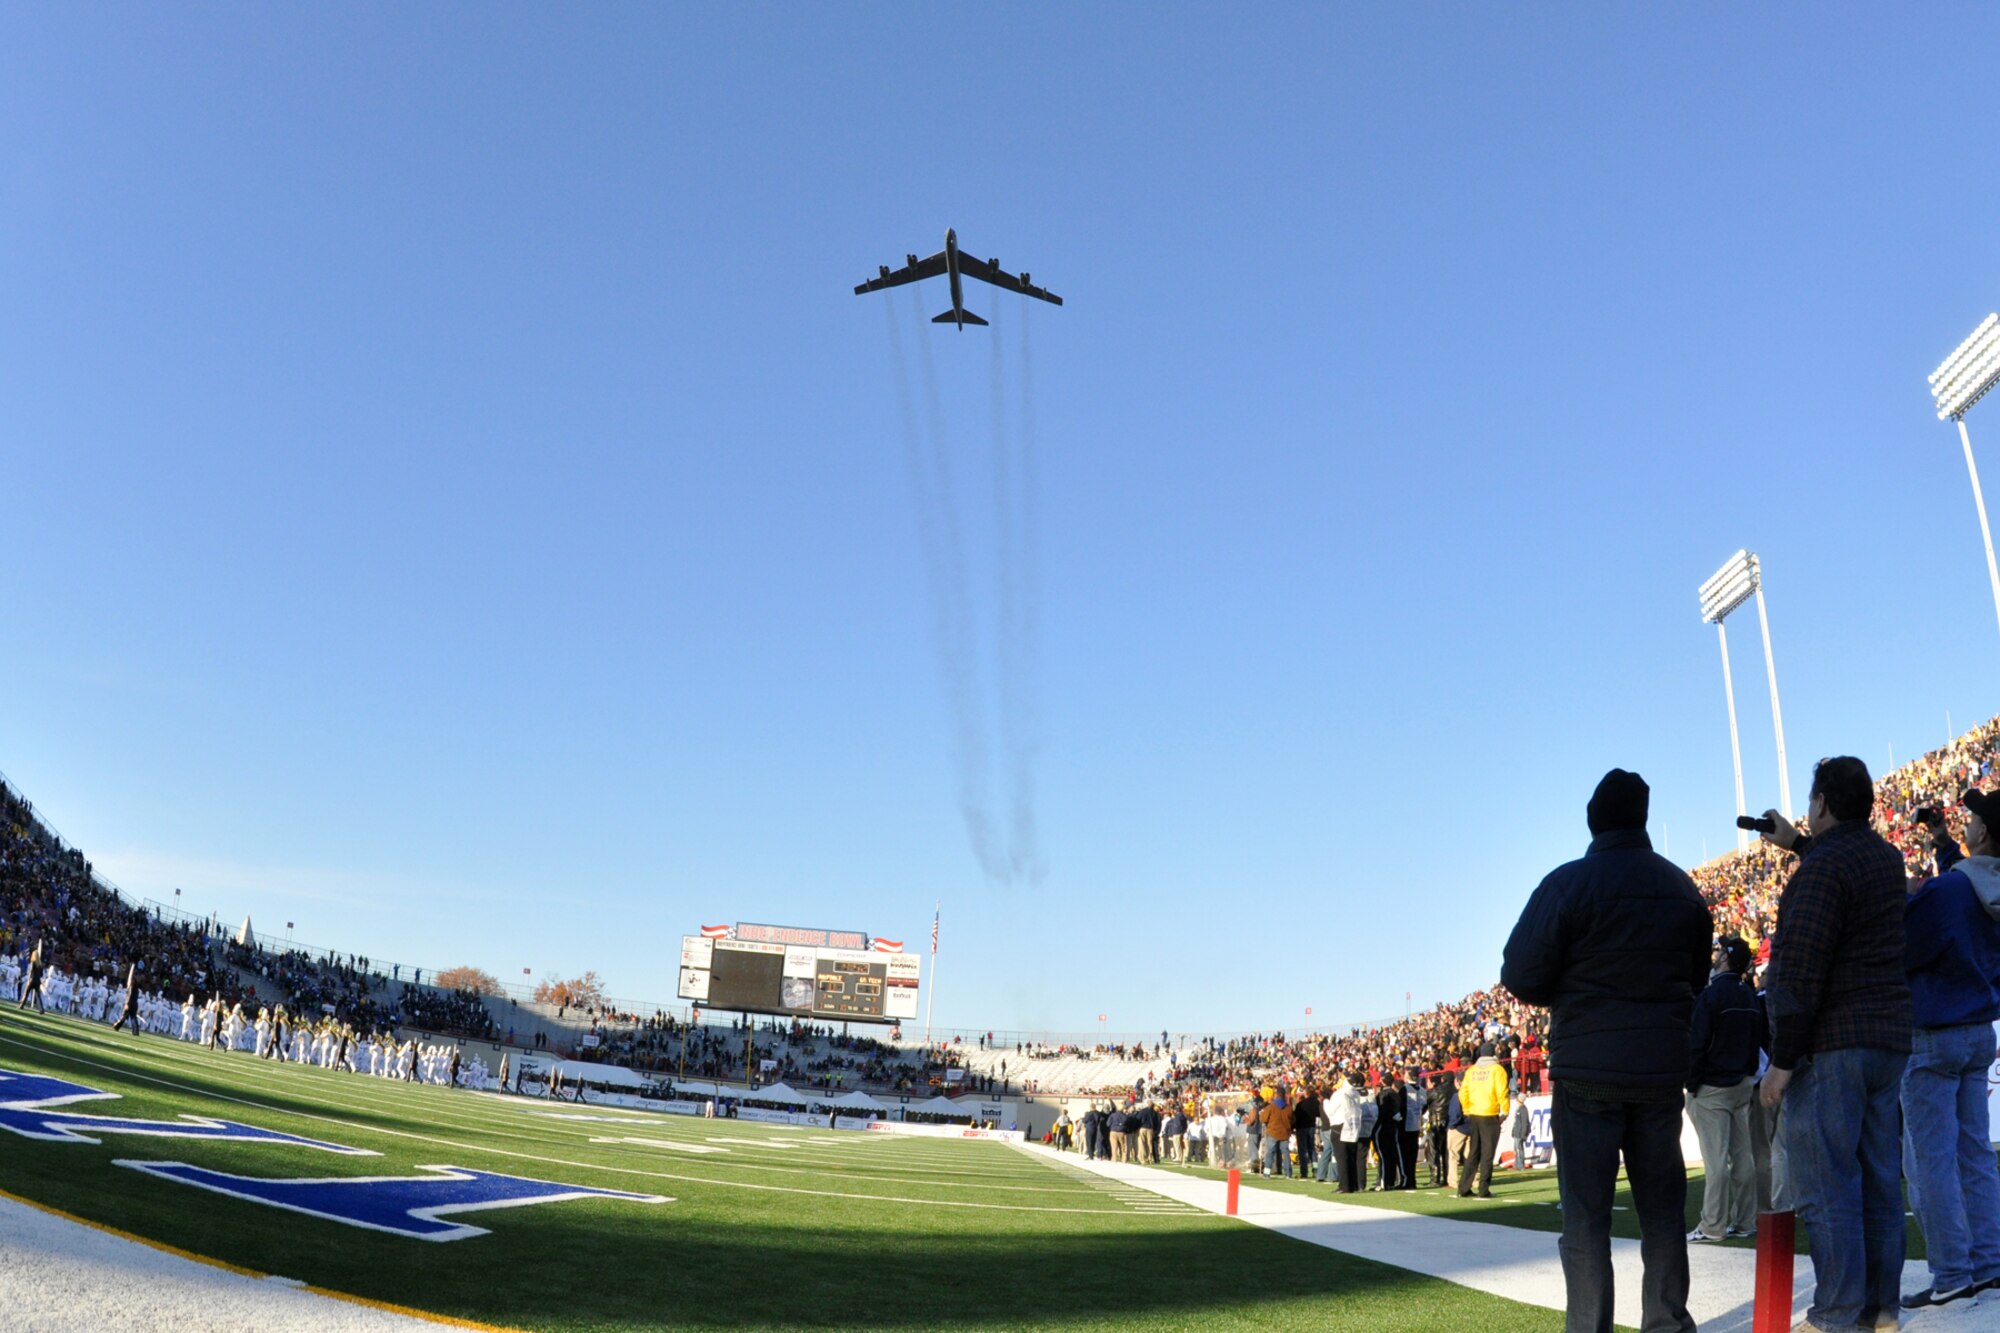 A B-52 Stratofortress provides a flyover for the AdvoCare V100 Independence Bowl Dec. 27 in Shreveport, La. The B-52, from the 917th Wing at Barksdale Air Force Base, was flown by a blended crew of active duty from the 2d Bomb Wing's 11th Bomb Squadron and Air Force Reservists from the 93rd Bomb Squadron. The U.S. Air Force Academy Falcons defeated the Georgia Tech Yellow Jackets in the Independence Bowl 14-7. (U.S. Air Force photo/Tech. Sgt. Jeffrey Walston)
